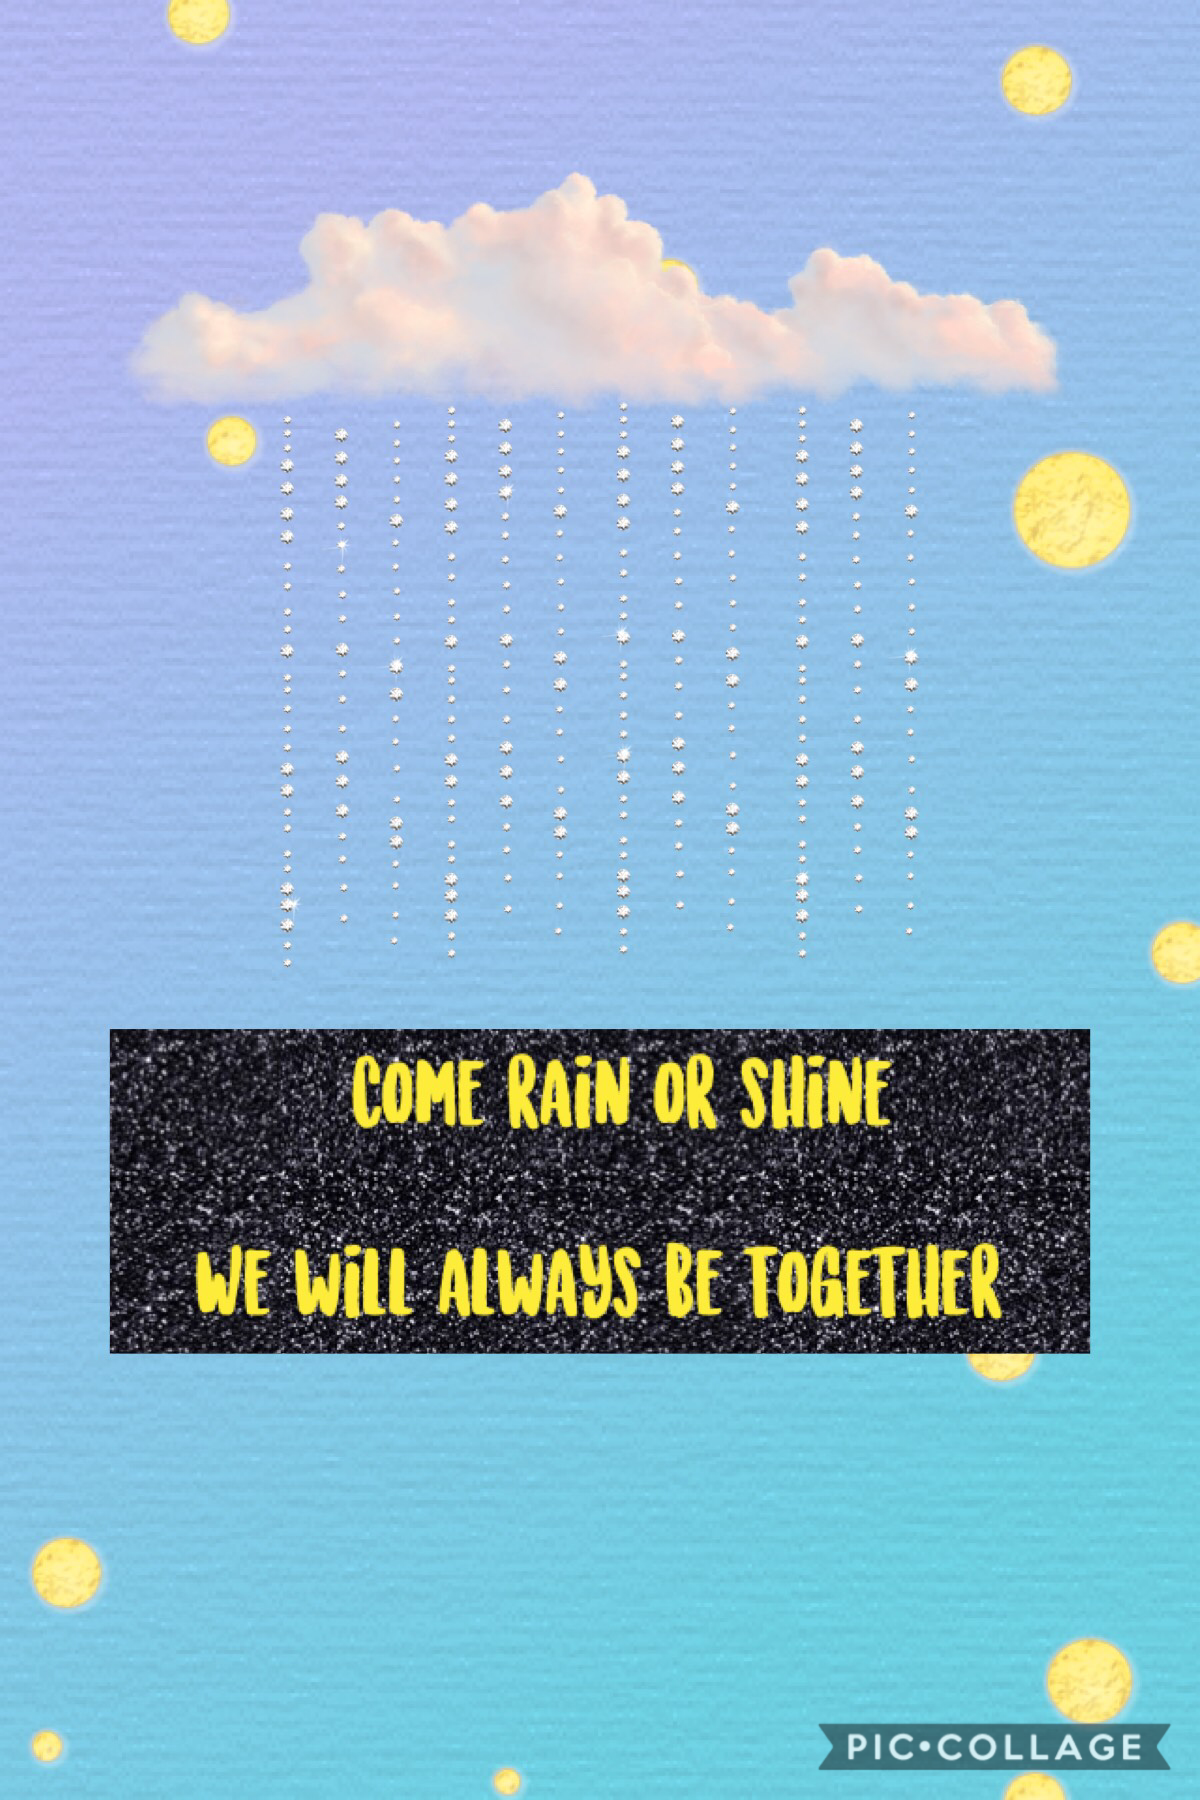 A thought for rainy days